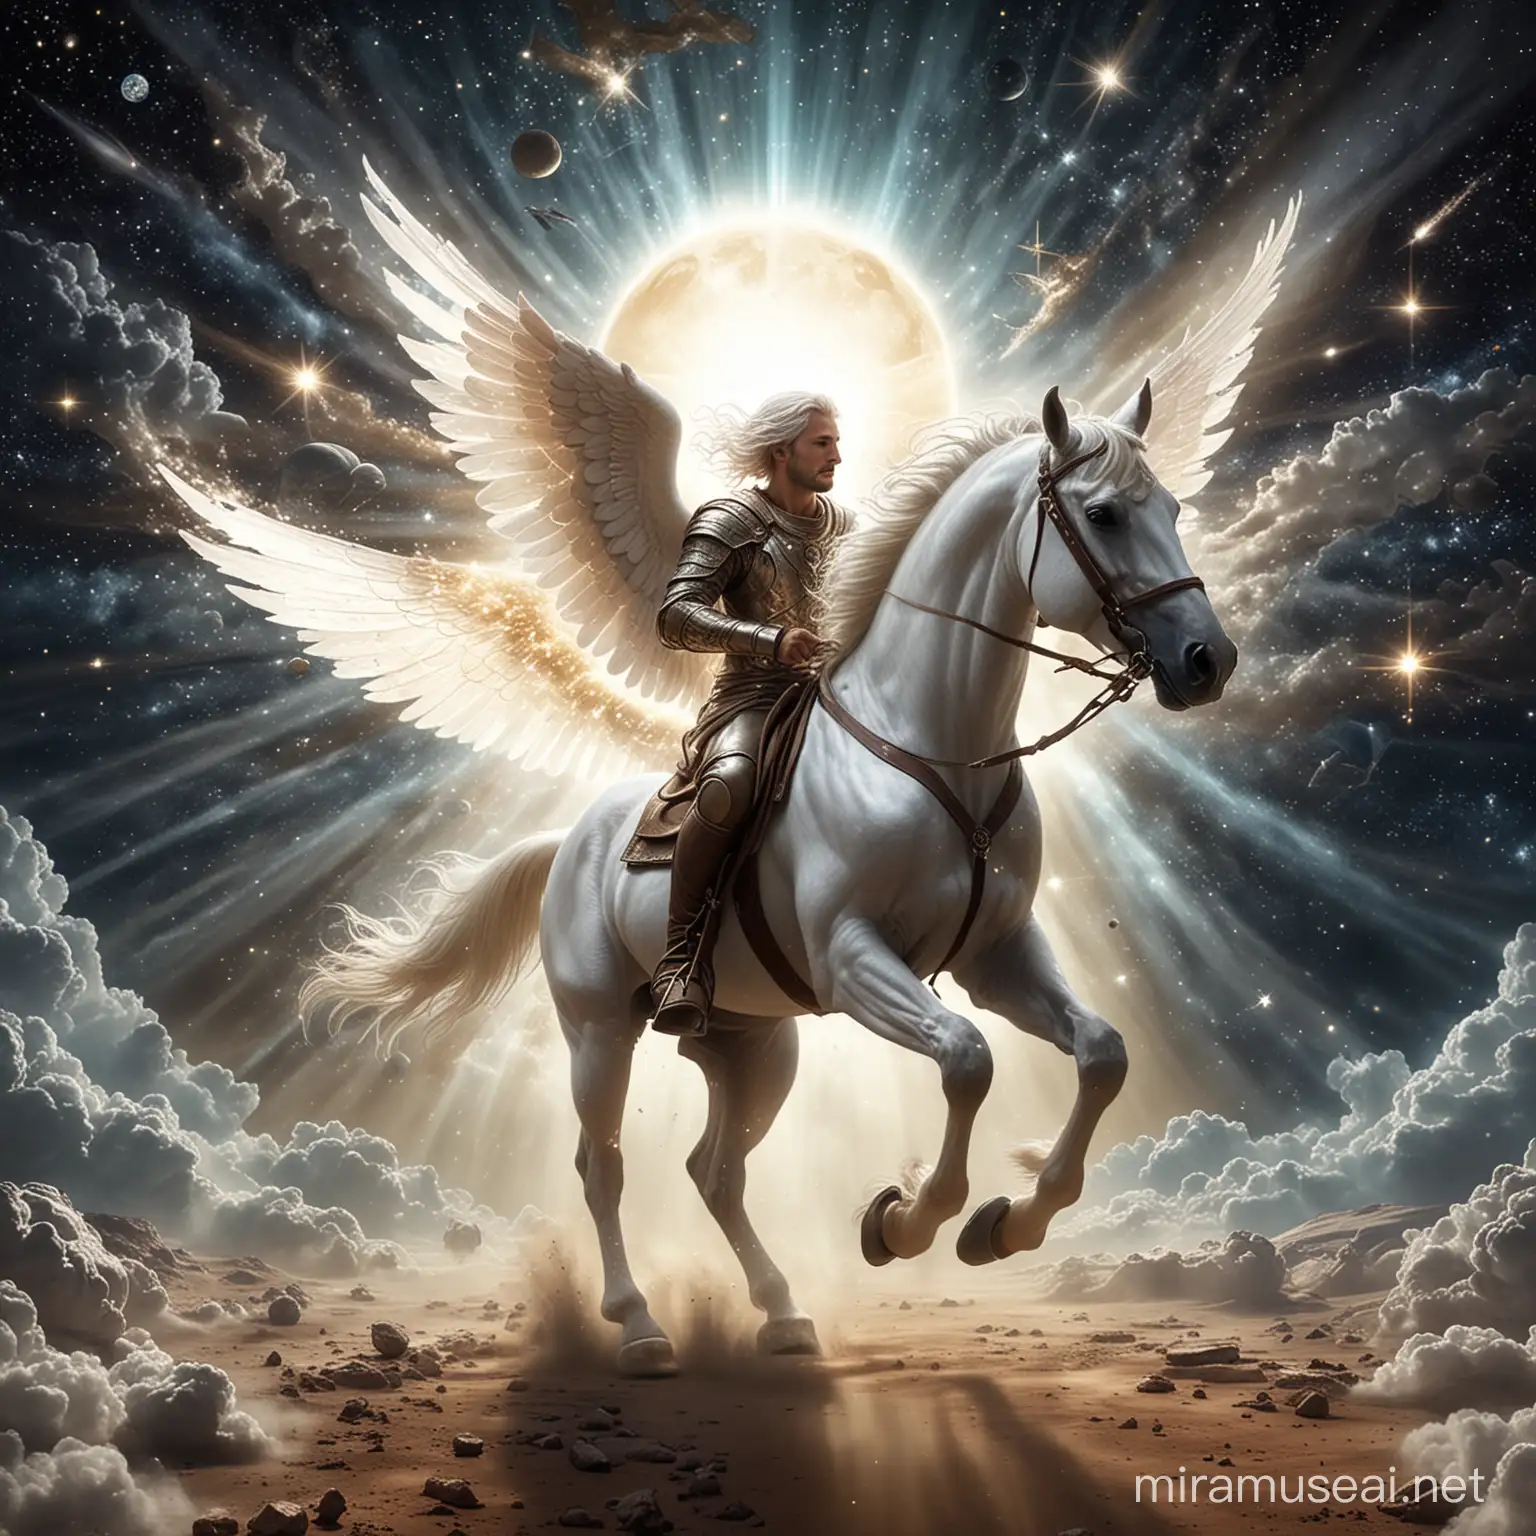 winged white horse running through planets and stars and there is a holy person is riding the horse..and this holy person is a man made of light rays